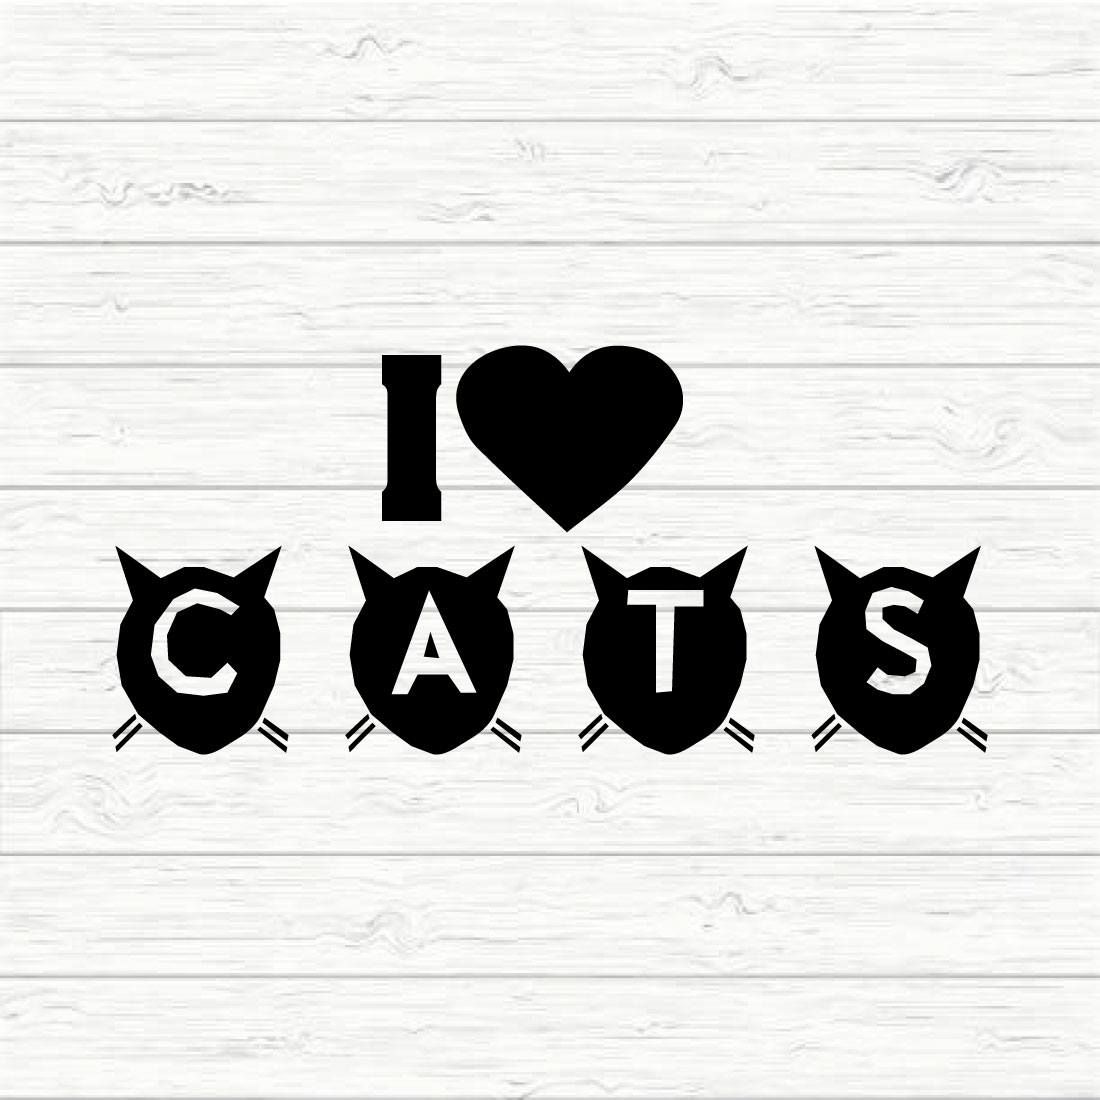 I Love Cats preview image.